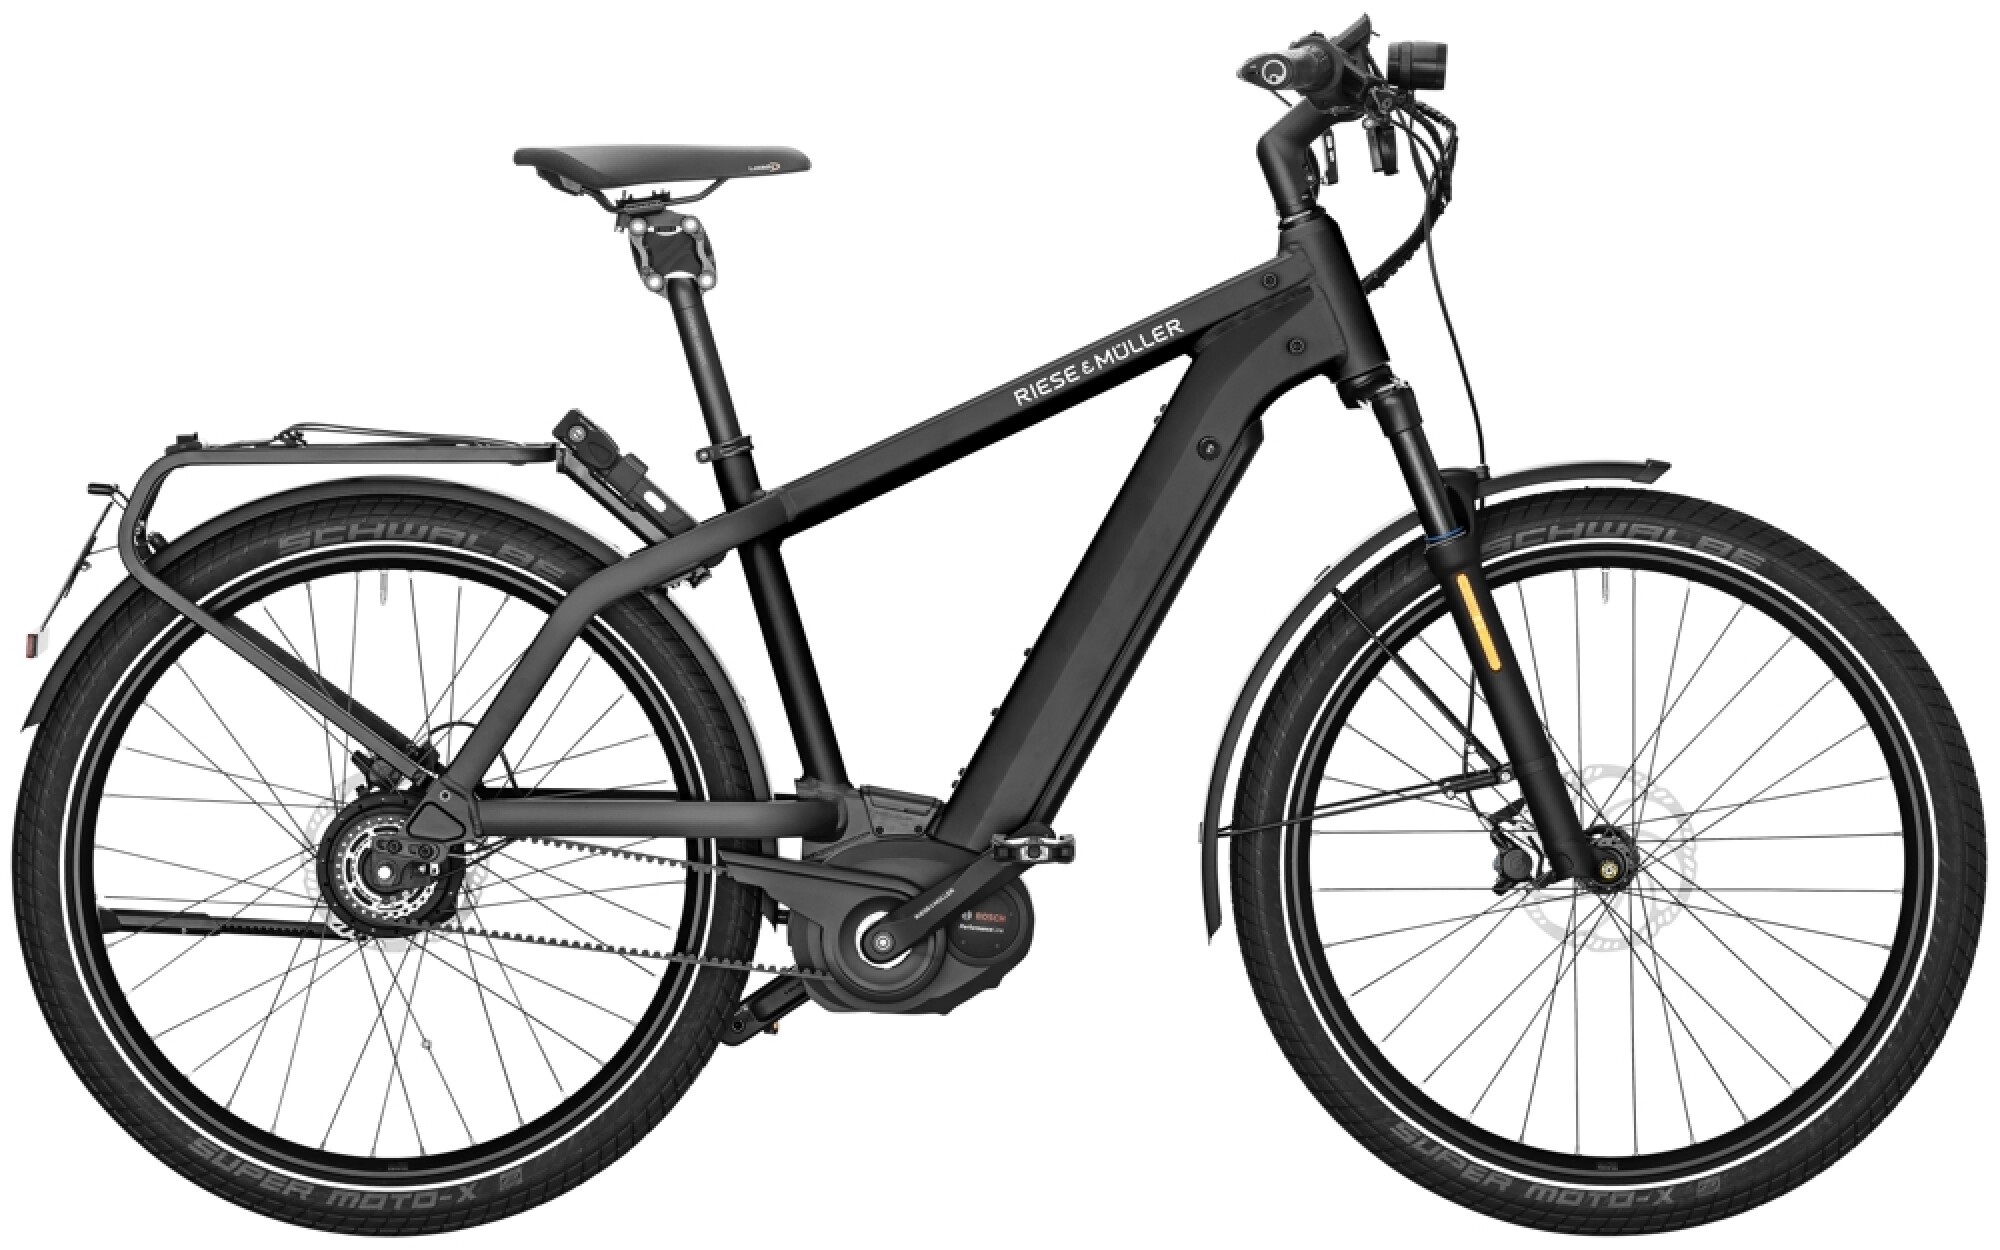 EBike Riese und Müller Charger GT vario HS 2020 bei